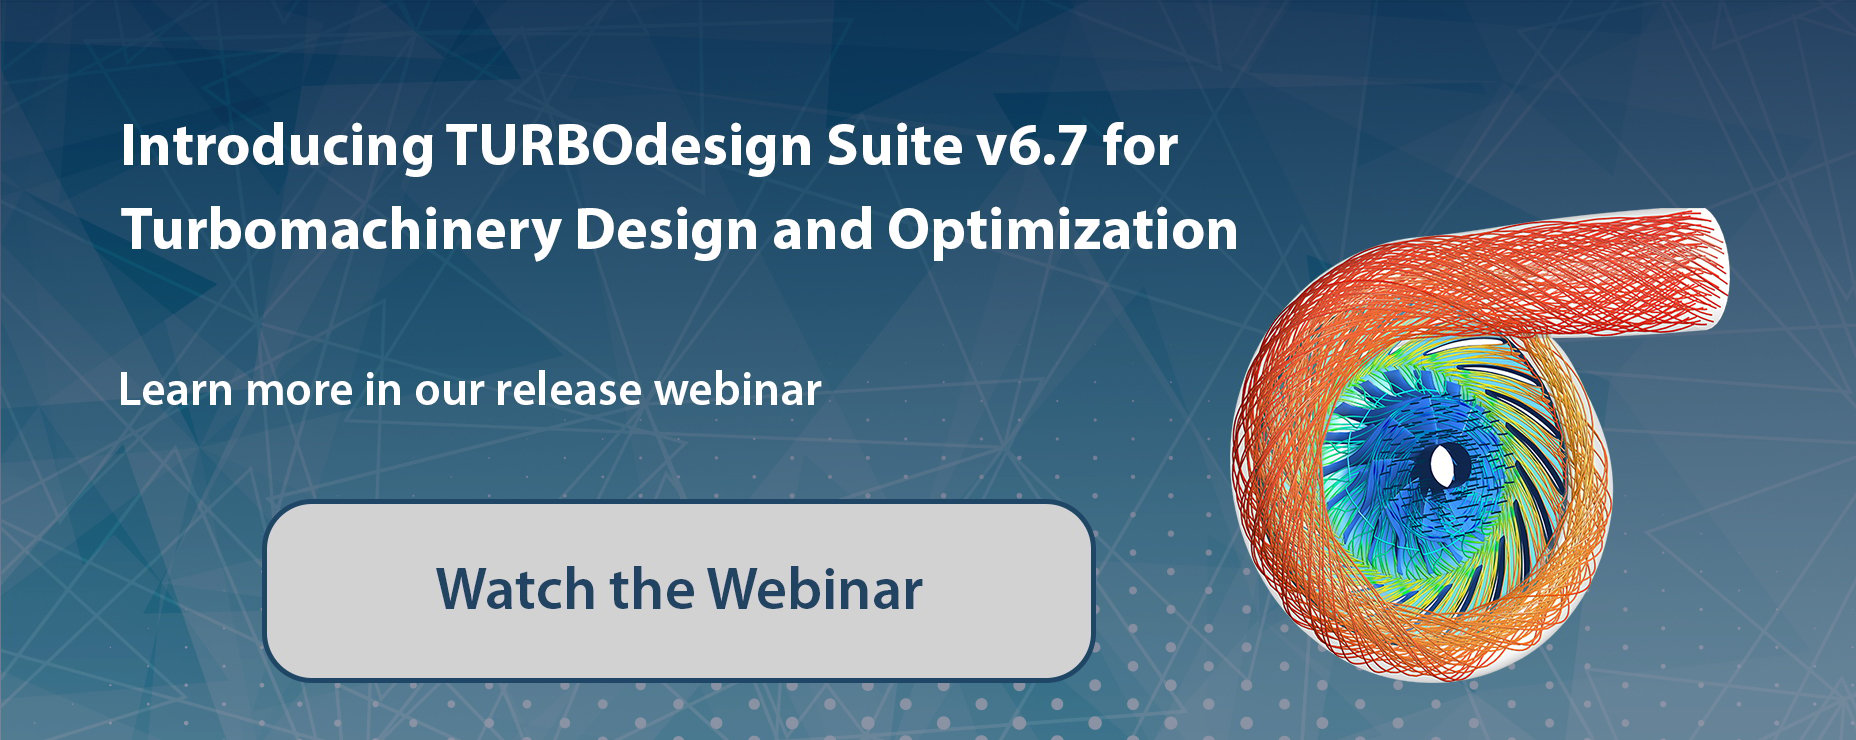 Introducing TURBOdesign Suite v6.7